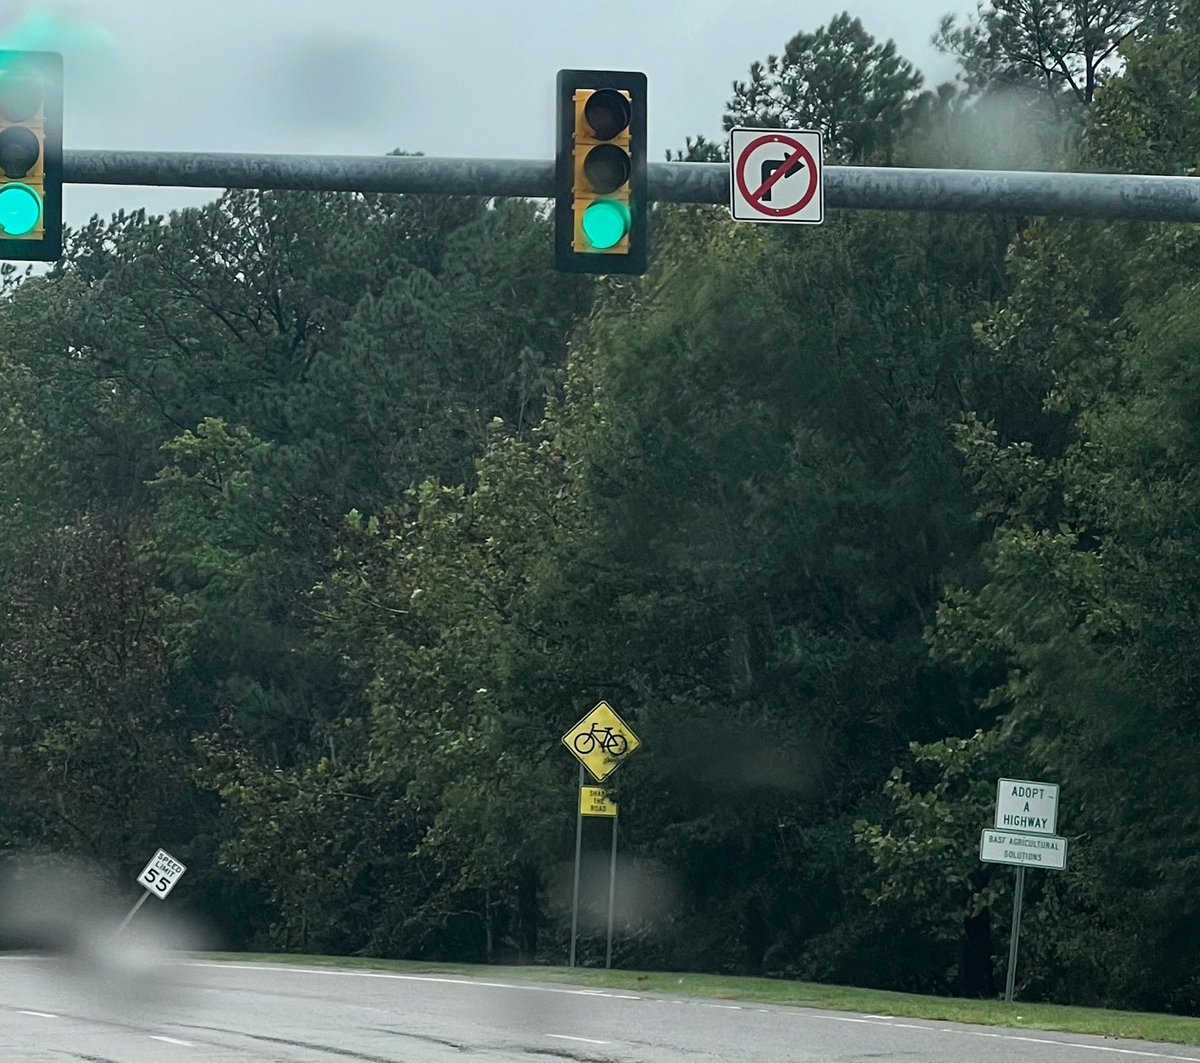 This morning I drove to @TheRTP. There are short rec trails on campuses, but no network of sidewalks or bike paths. See this juxtaposition of road signs on TW Alexander: Adopt a Highway, Share the Road, Speed Limit 55MPH (knocked over). #WeekWithoutDriving